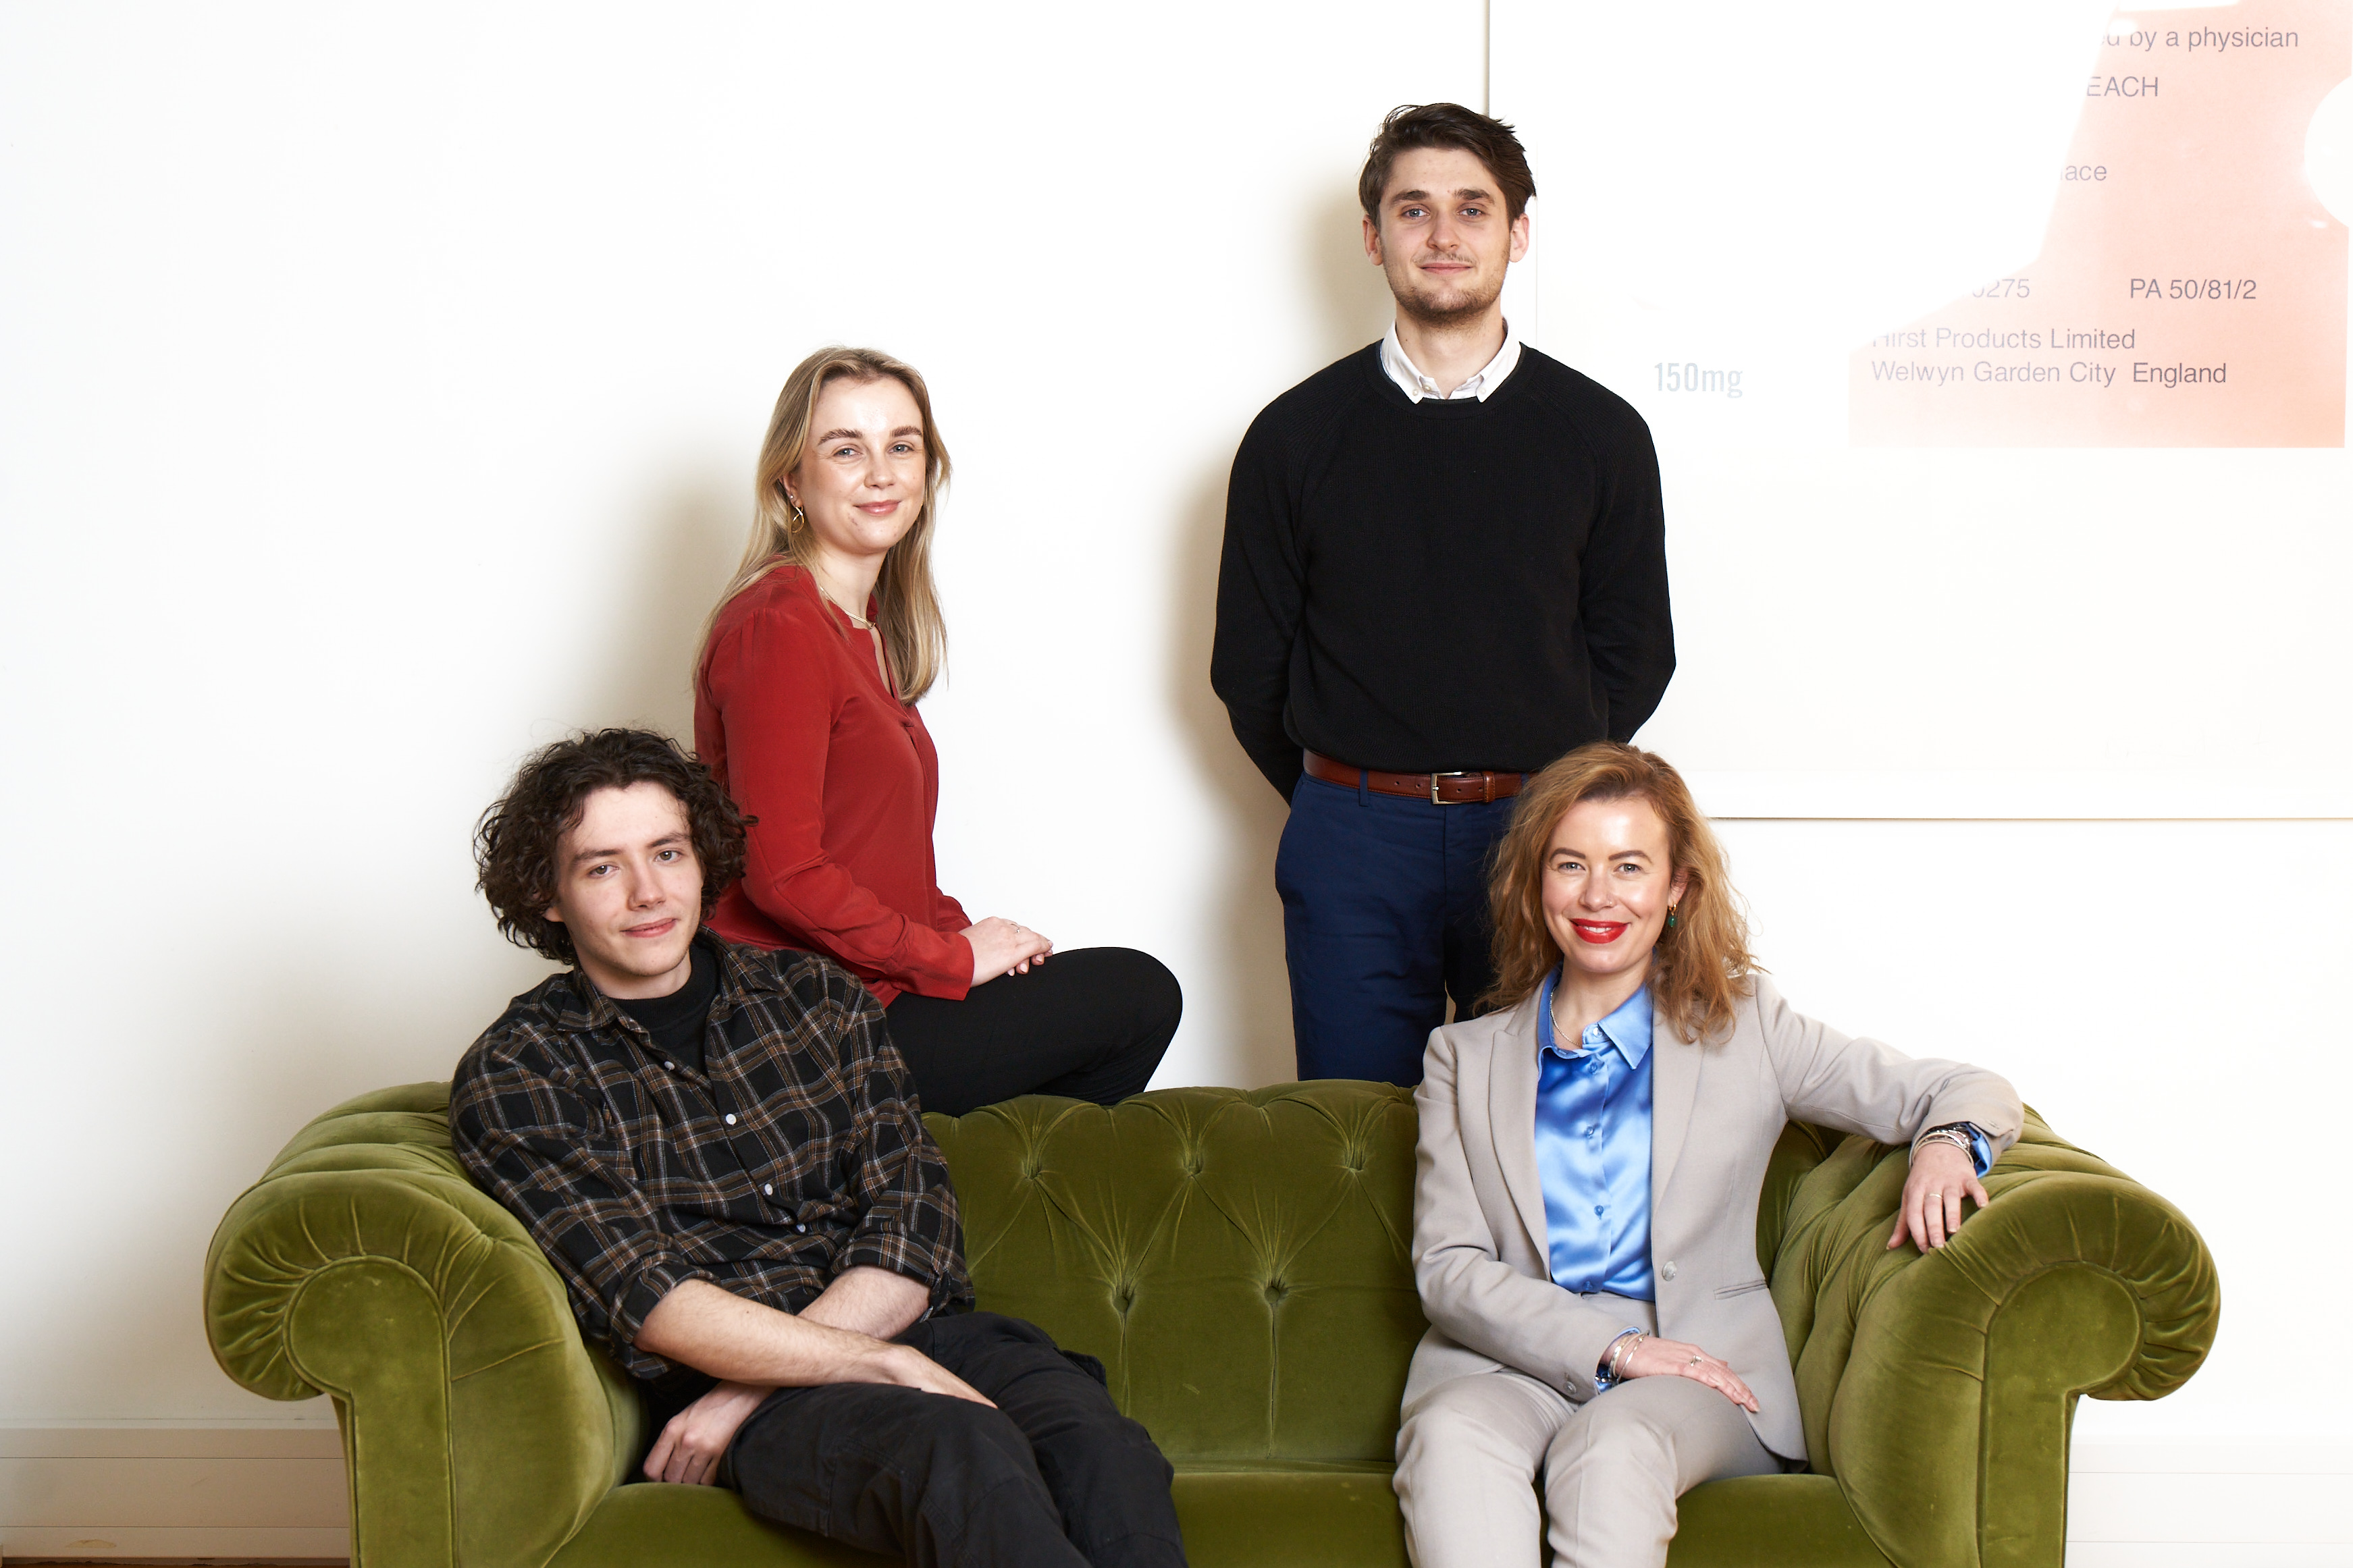 Tech for good startup HACE secures £450,000 funding